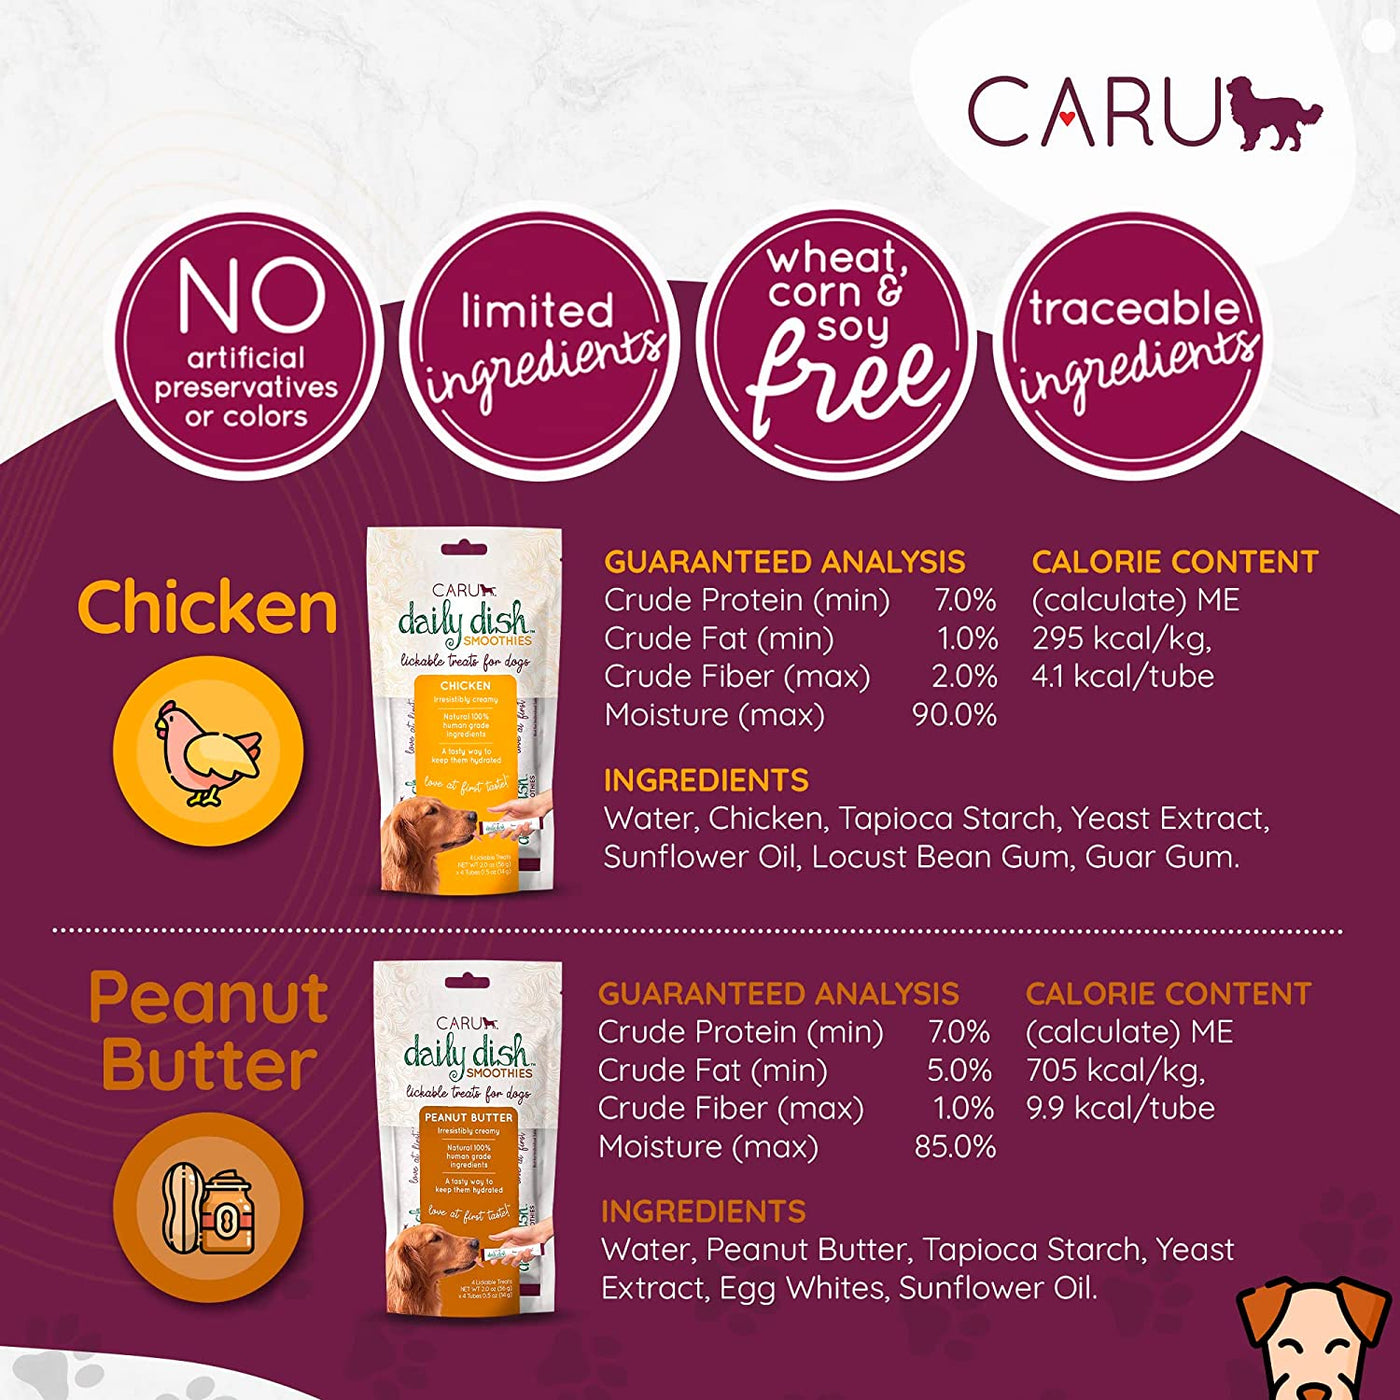 Caru - Daily Dish Smoothies - Lickable Chicken Dog Treat - 4 Pack.5oz Tubes